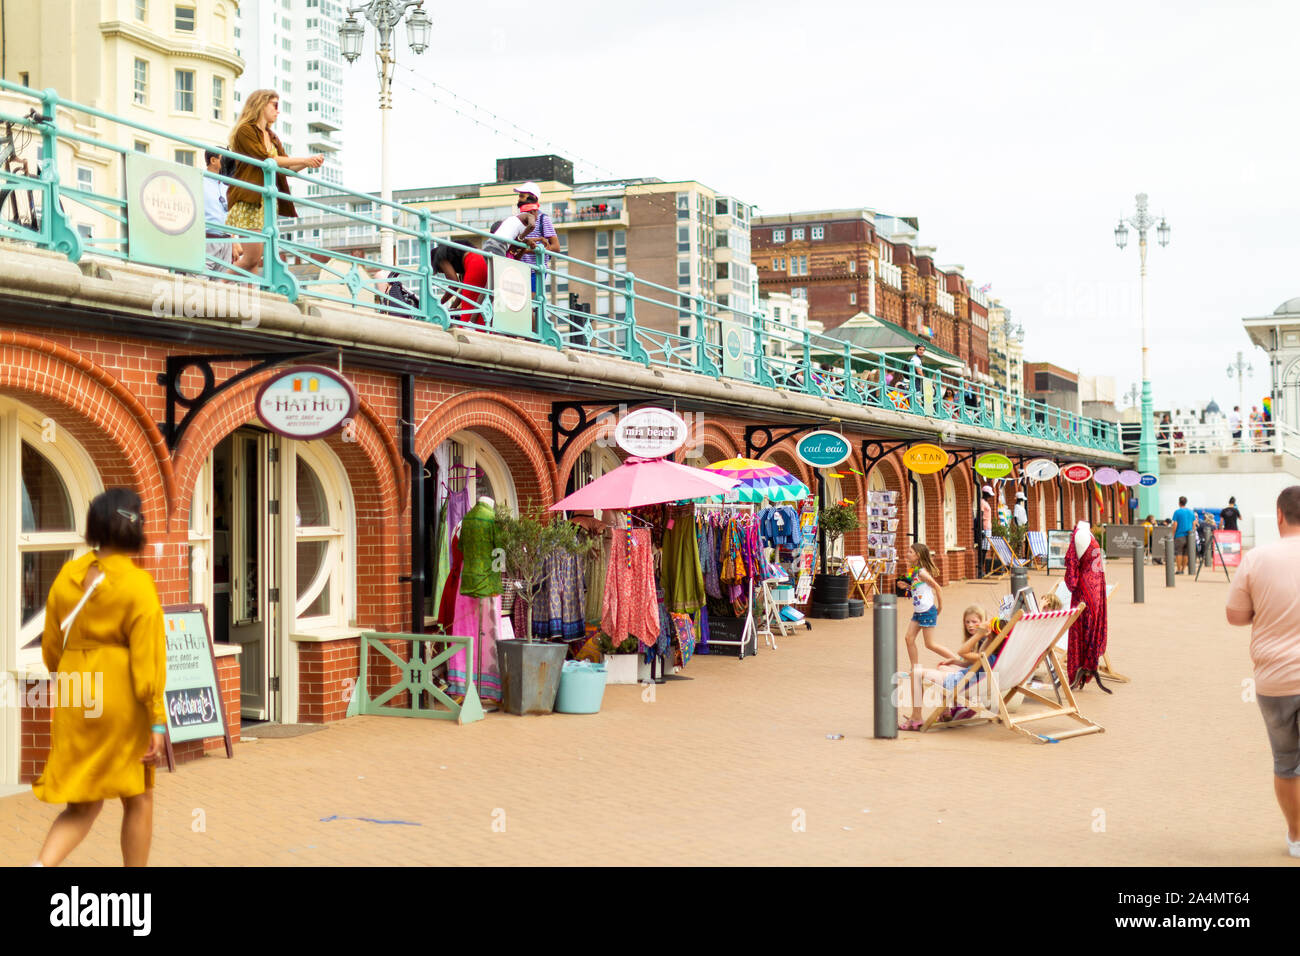 The seaside resort town of Brighton and Hove in East Sussex, England on August 3, 2019. Stock Photo